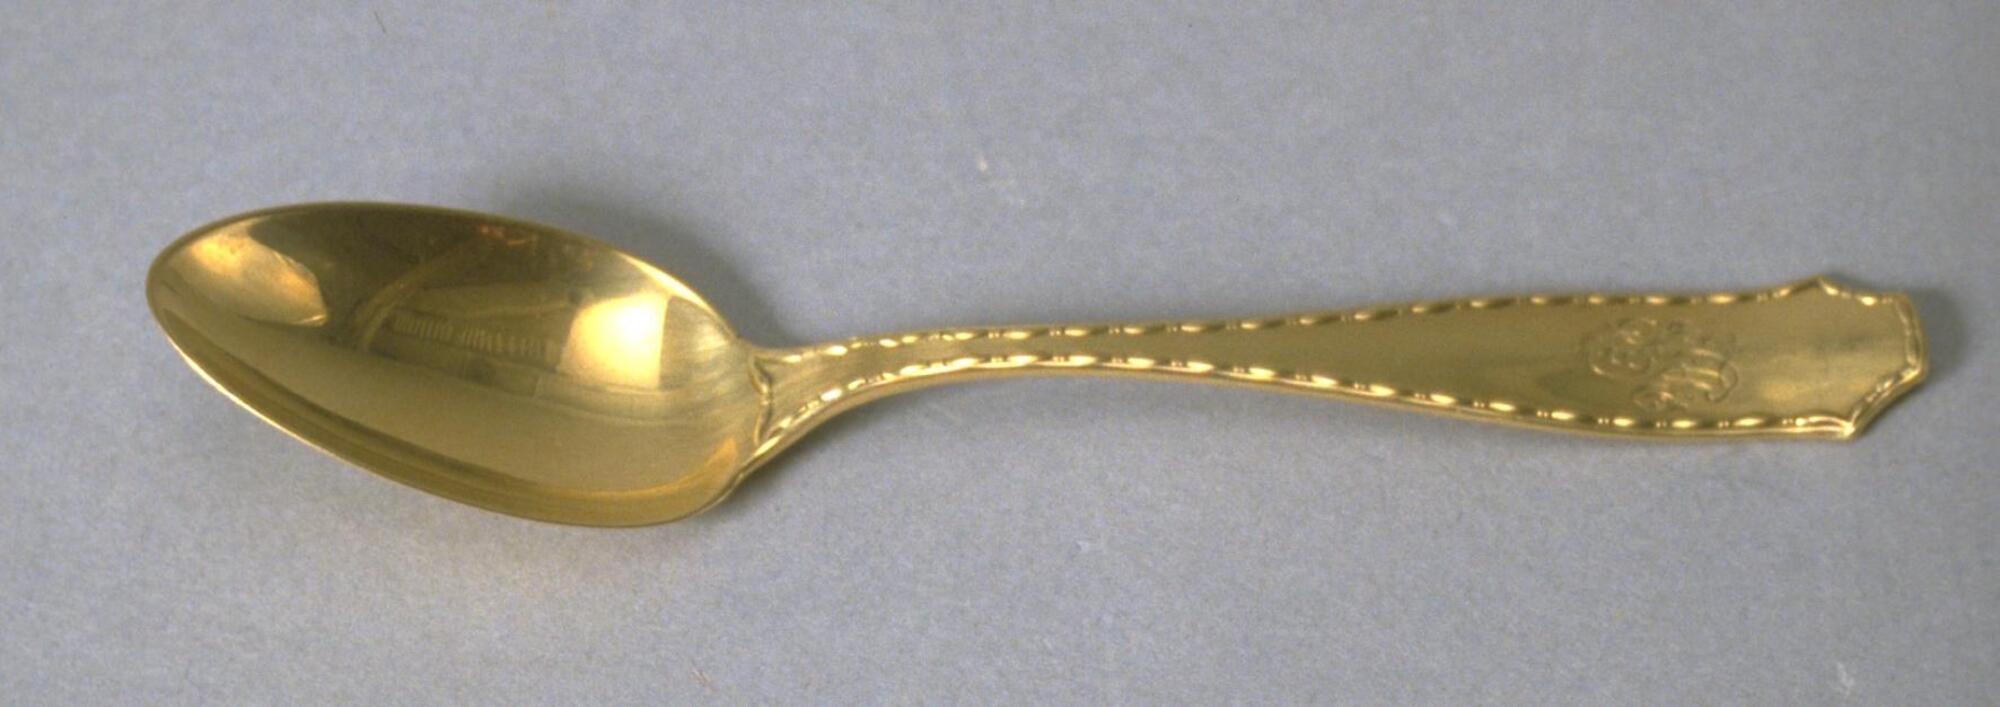 Gold spoon with thin handle that widens at the end with egg-and-dart-like motif along edges